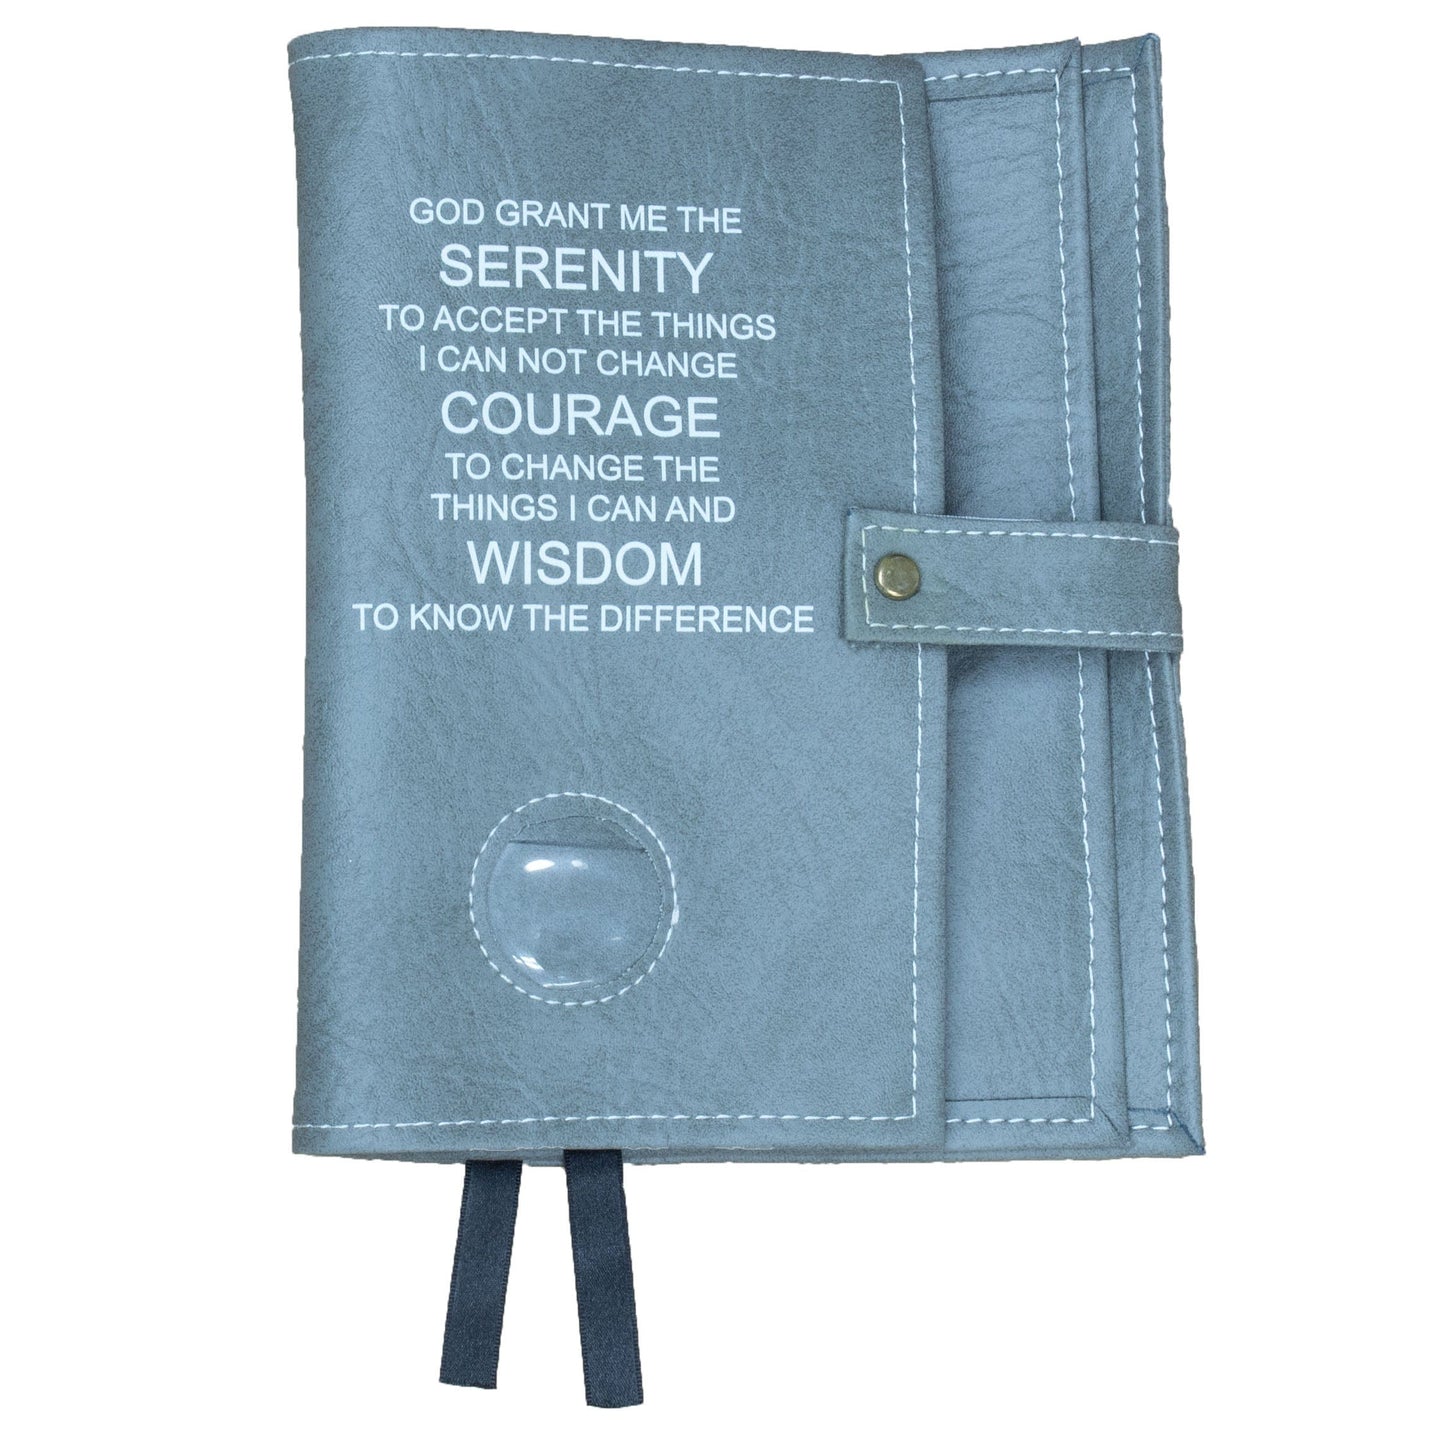 AA Grey Double Book Cover With The Serenity Prayer, With Sobriety Chip Holder